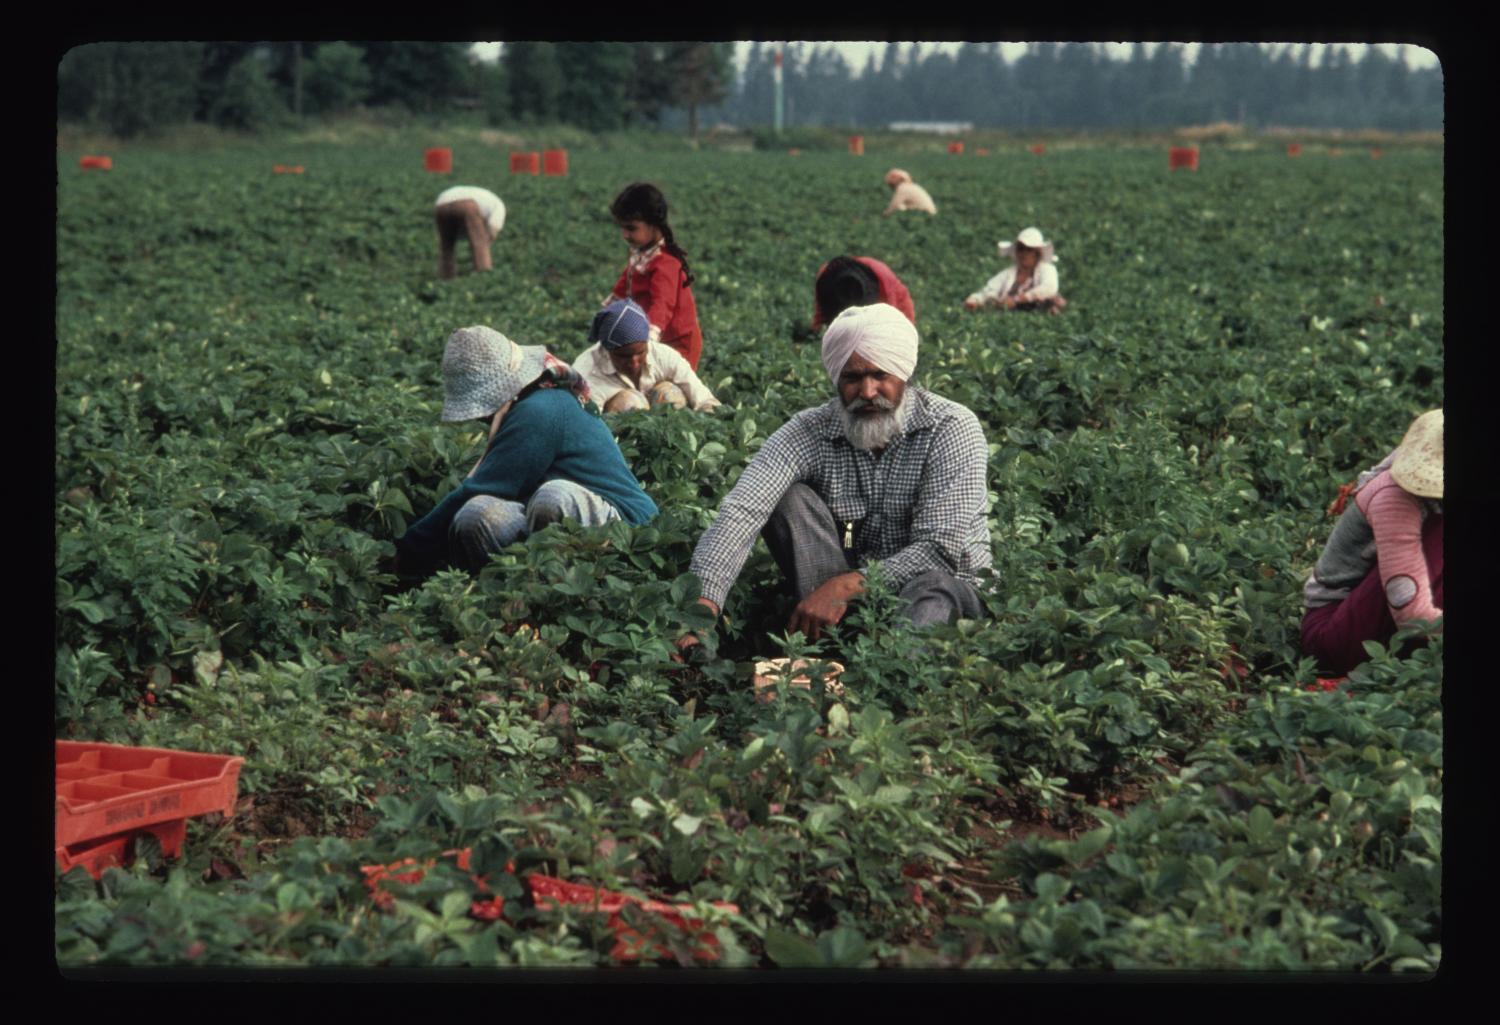 Strawberry pickers in the Fraser Valley harvesting in the fields. Circa late 1970s.